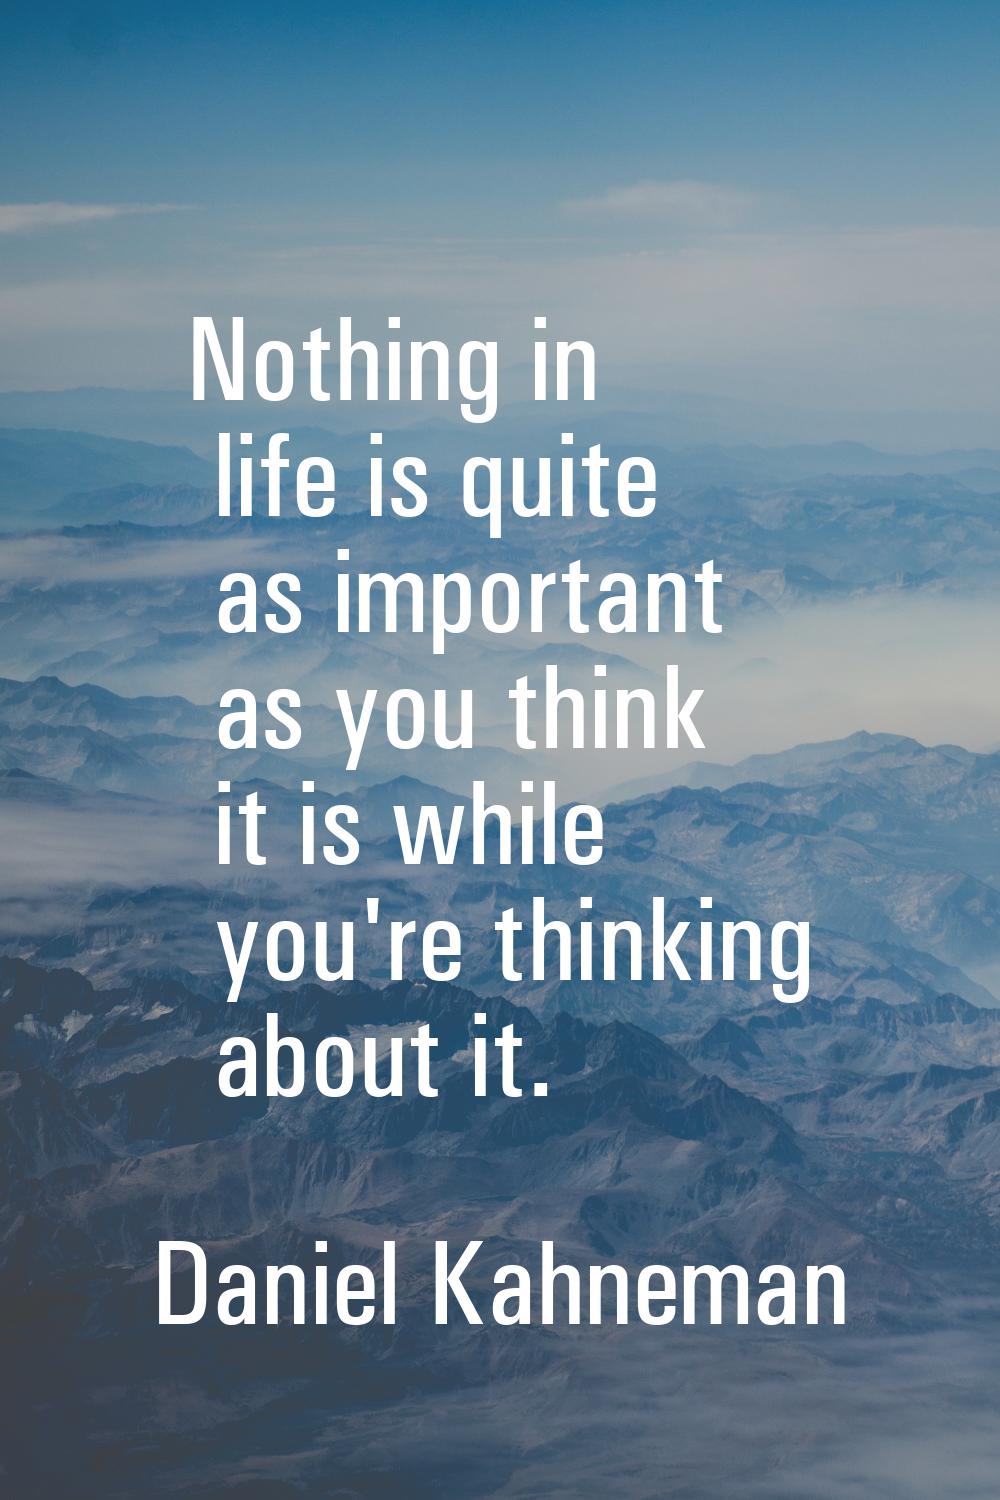 Nothing in life is quite as important as you think it is while you're thinking about it.